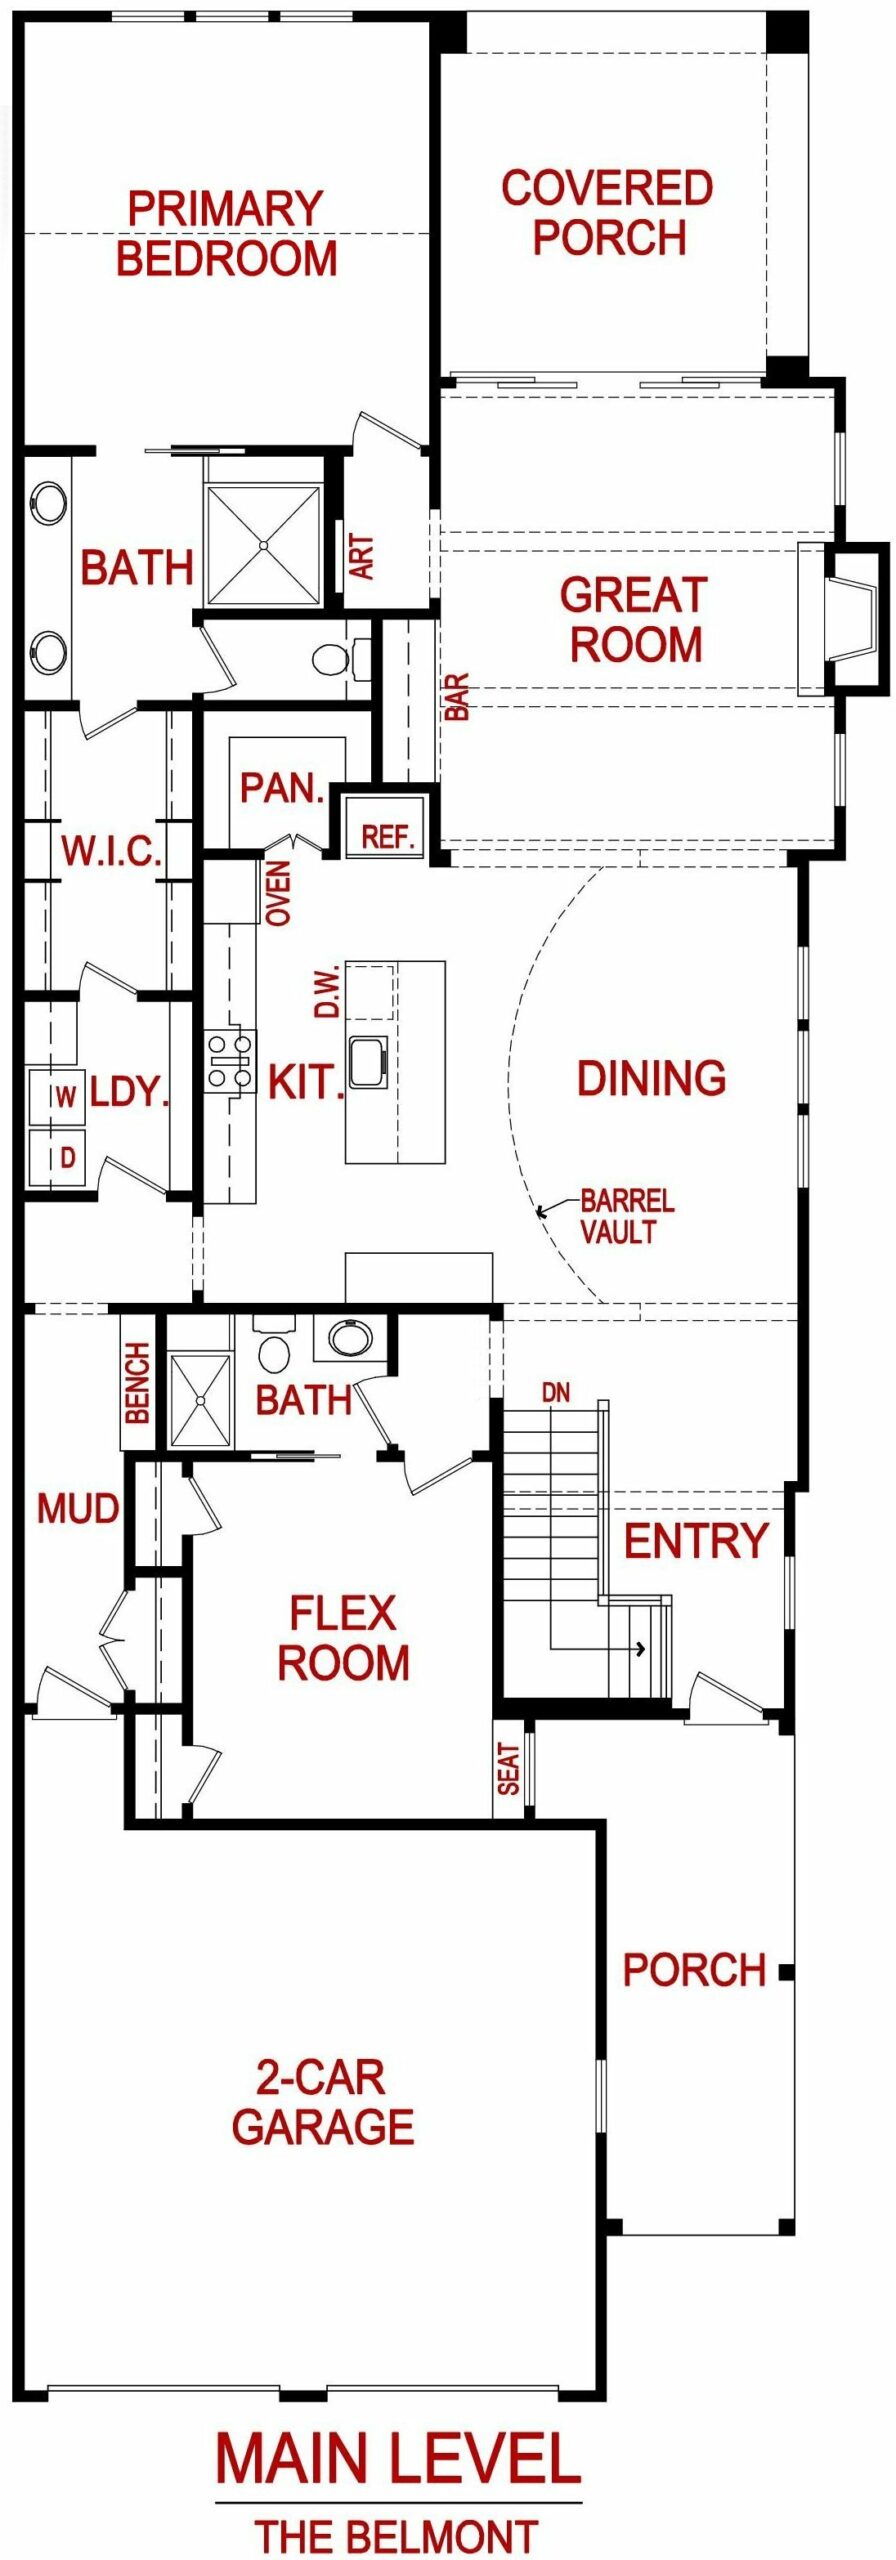 floorplan for the belmont model from lambie homes